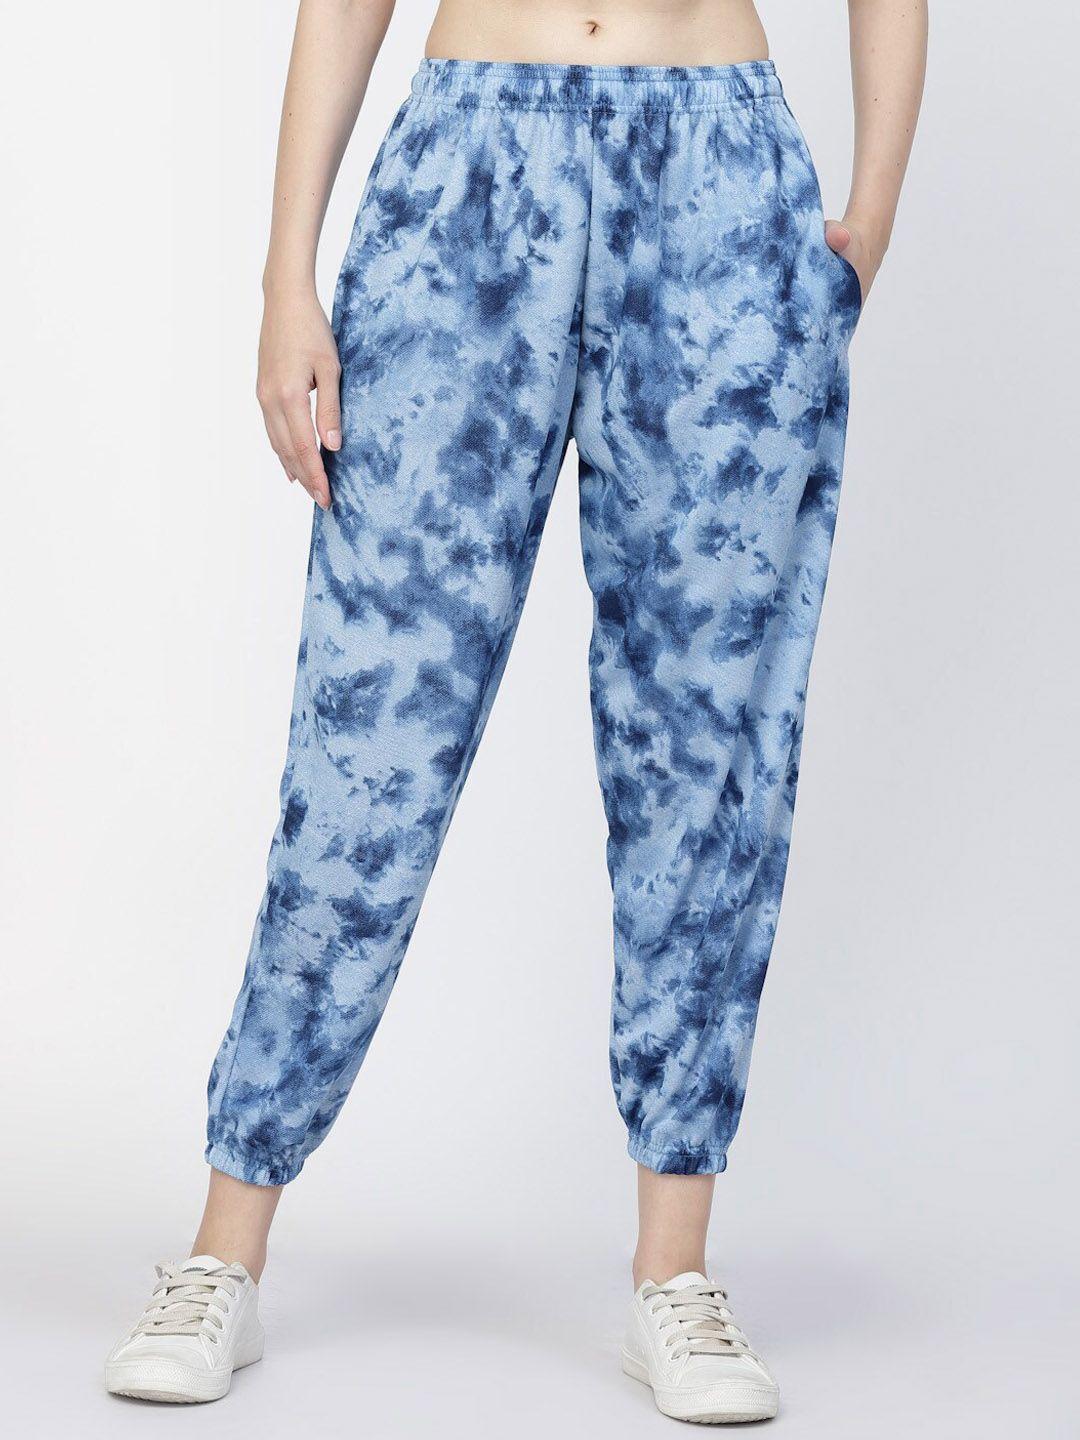 uzarus-women-abstract-printed-relaxed-fit-joggers